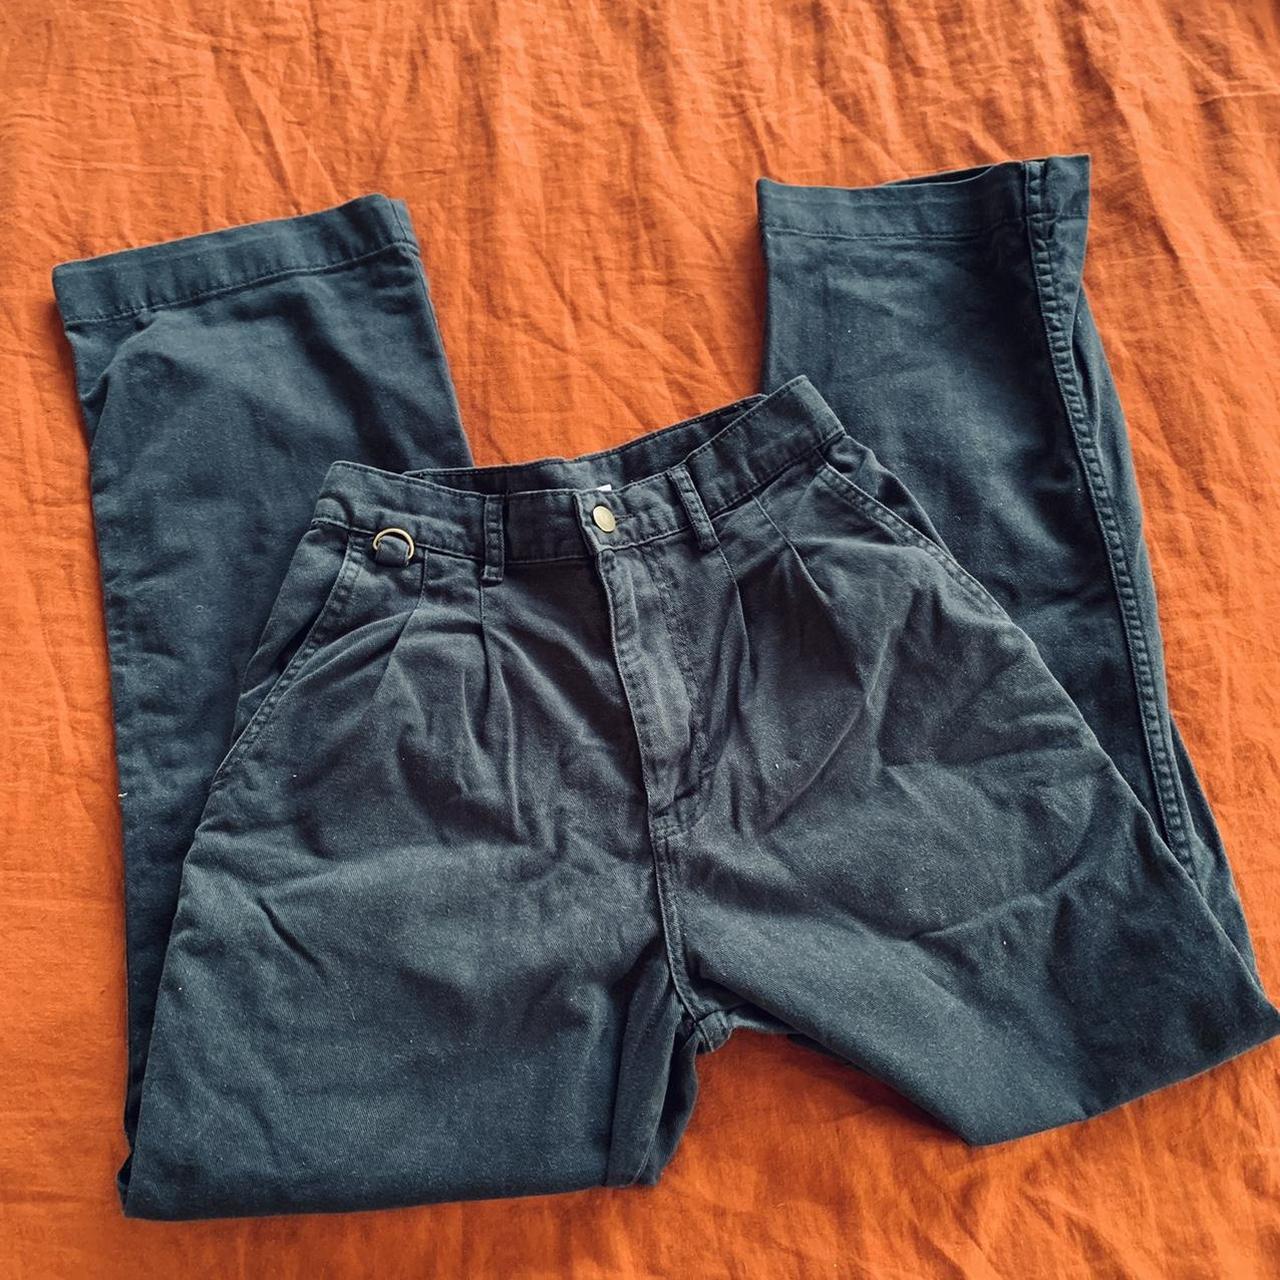 SUK Workwear Relaxed work pants in size 8 Colour... - Depop